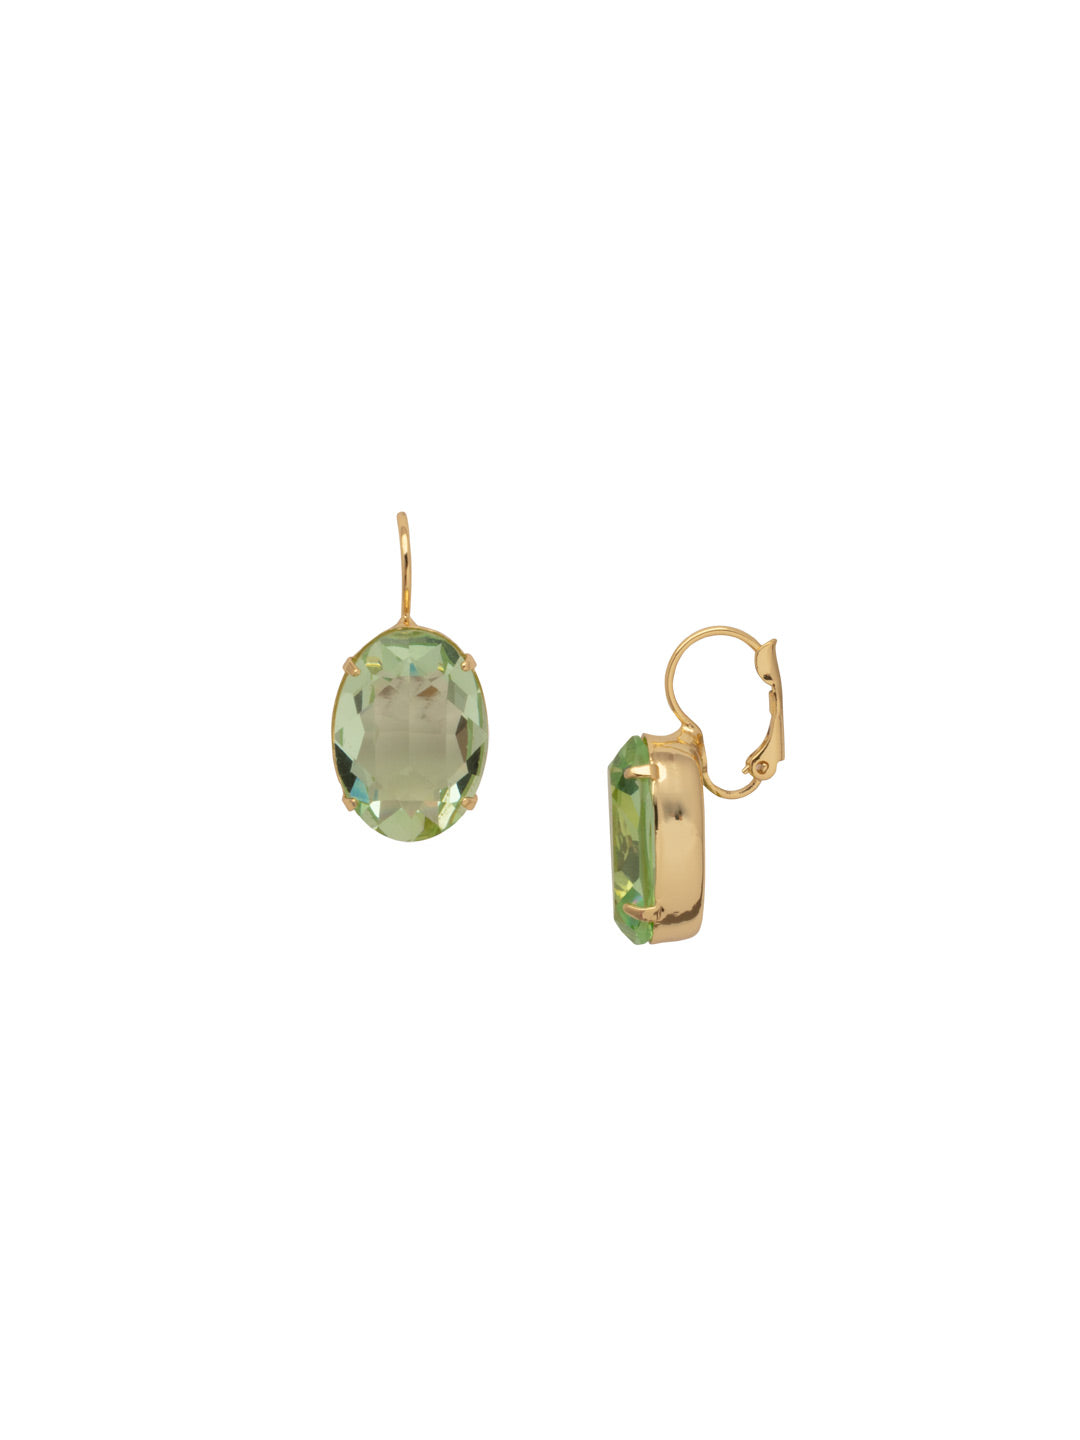 Julianna Oval Dangle Earrings - EFD76BGSGR - <p>The Julianna Oval Dangle Earrings feature a single oval cut candy gem on a lever back French wire. From Sorrelli's Sage Green collection in our Bright Gold-tone finish.</p>